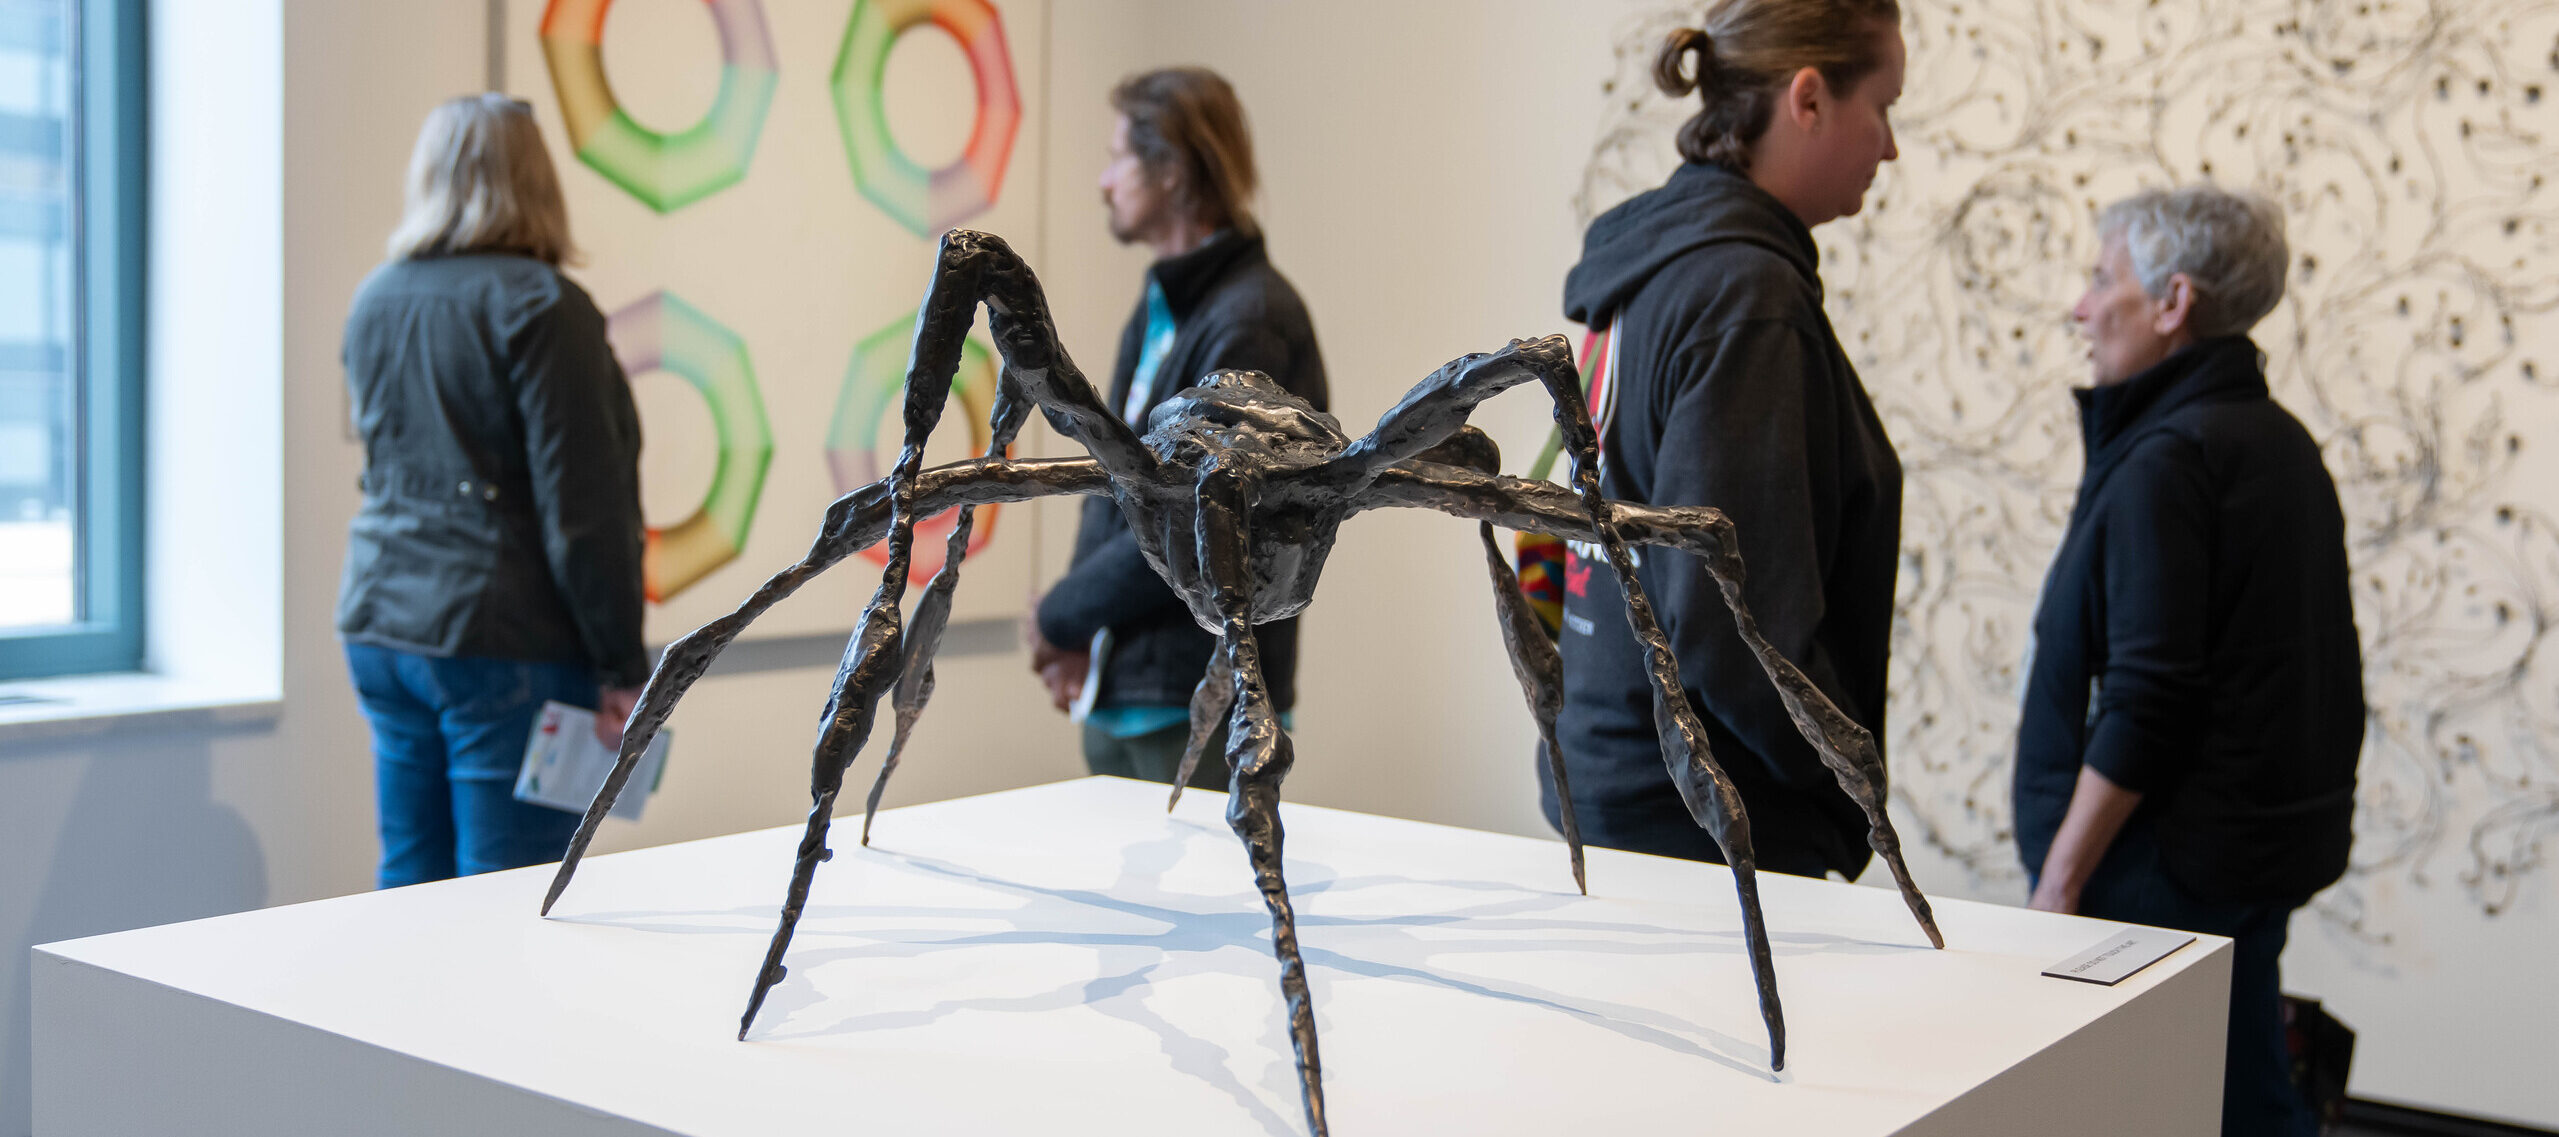 A bronze sculpture of a spider with arched, spindly legs sits on a white pedestal in a museum gallery. The spider appears to be frozen mid-step with some legs raised higher than the others. In the background, museum visitors observe artworks on the walls.